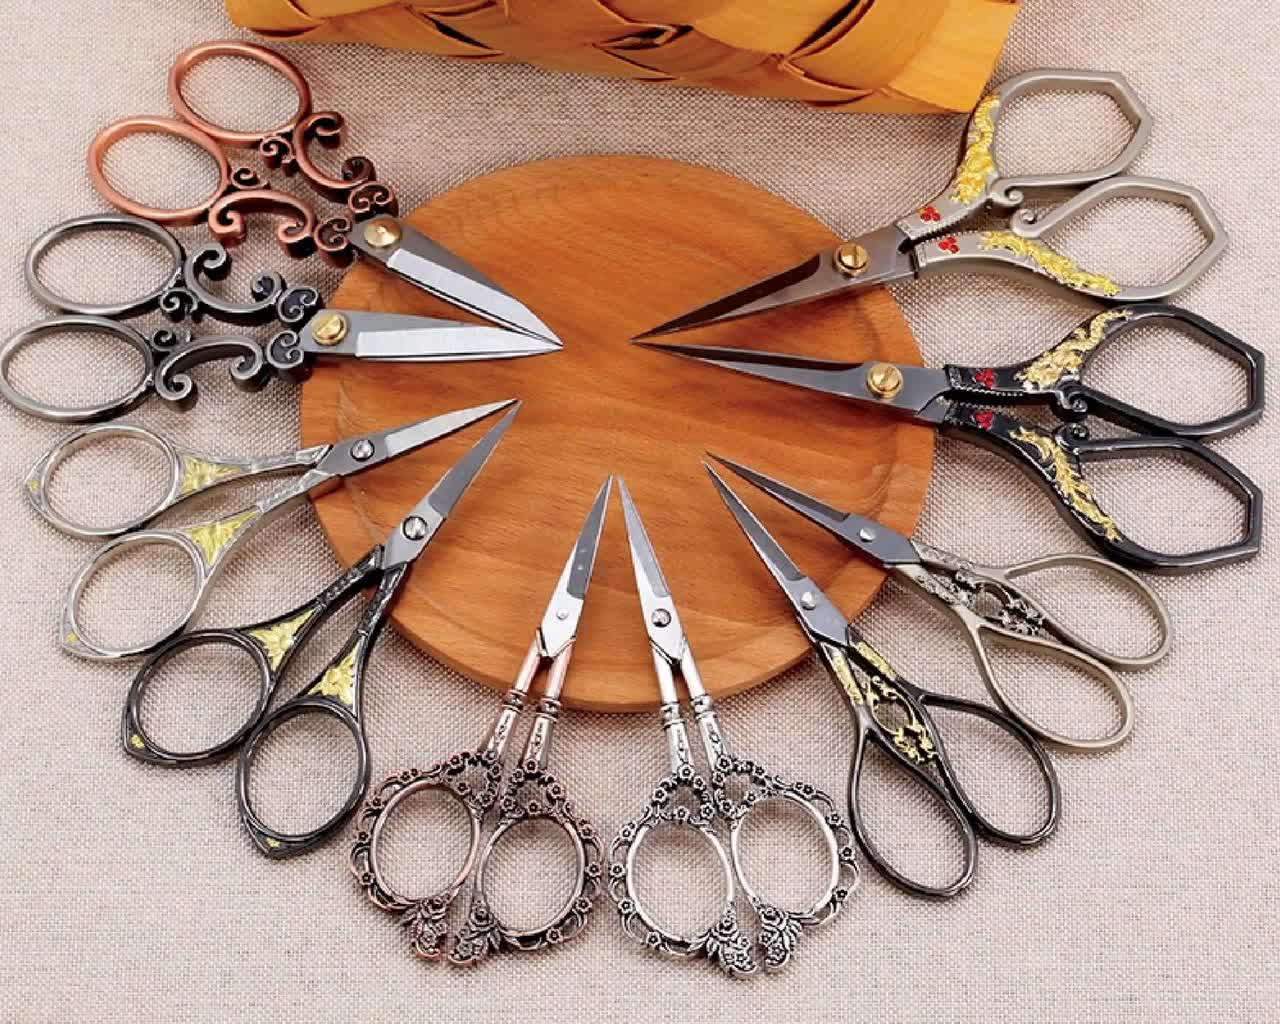 Vintage Embroidery Scissors Kit, Christmas Gift for Sewing Professional,  European Antique Sewing Kit, Complete Sewing Tools for Sewing Craft